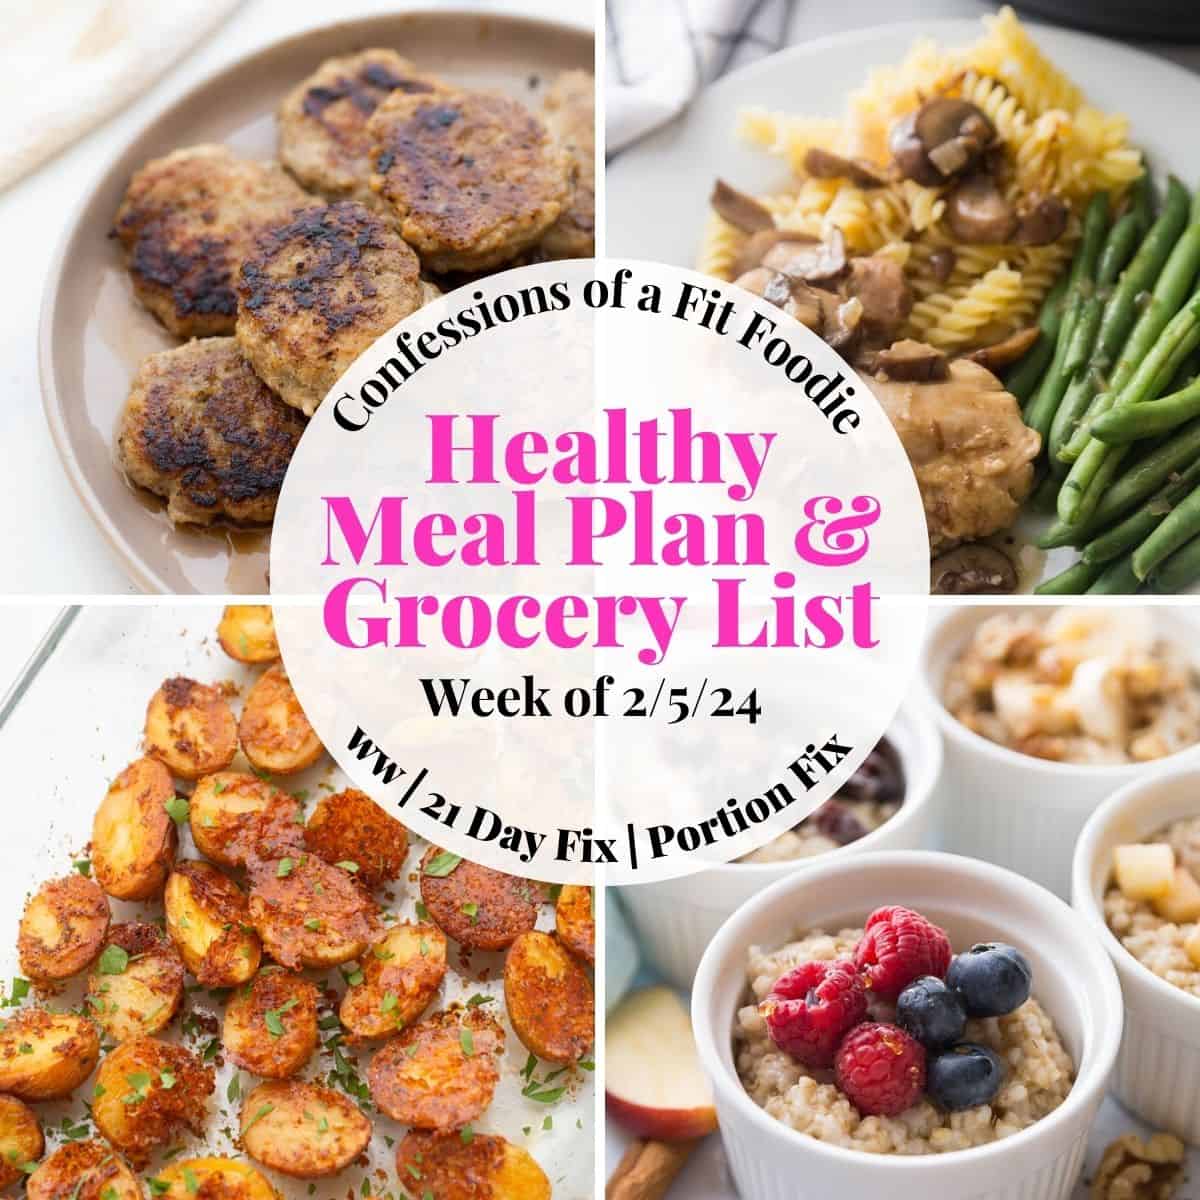 Food photo collage with pink and black text on a white background. Text says, "Healthy Meal Plan & Grocery List Week of 2/5/24"